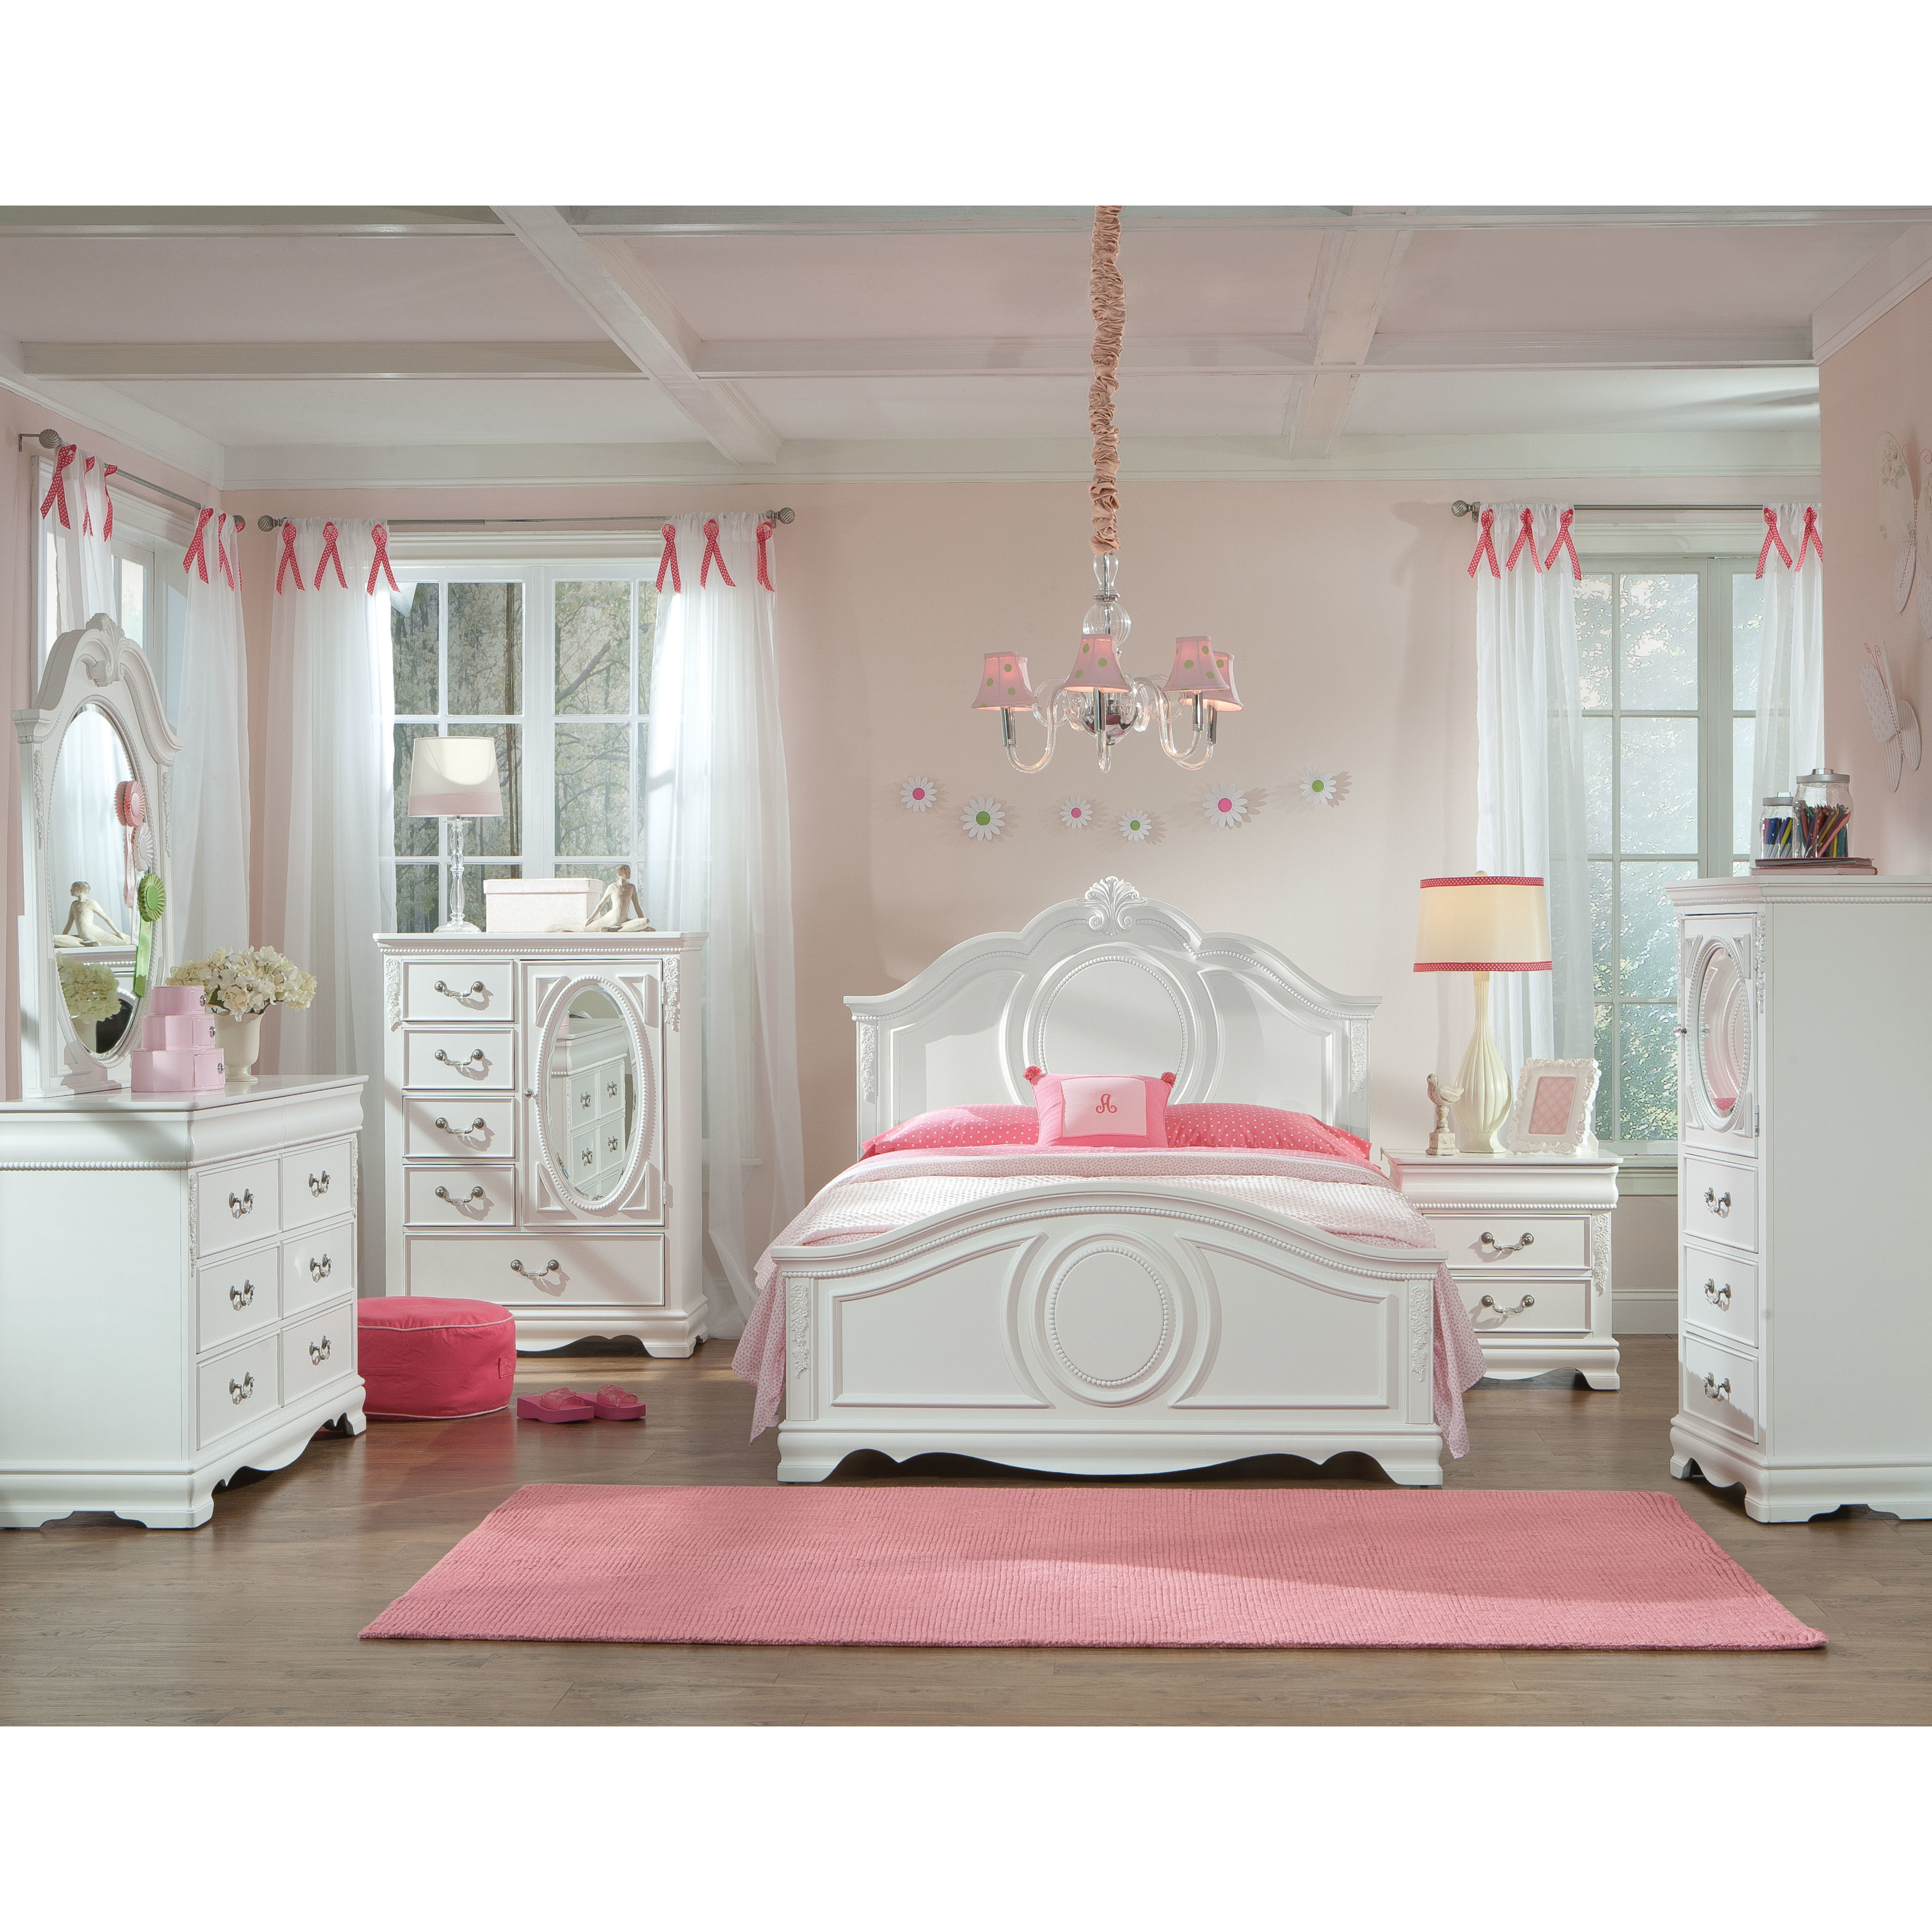 Toddler Girl Bedroom Furniture Eo Furniture within proportions 4230 X 4230